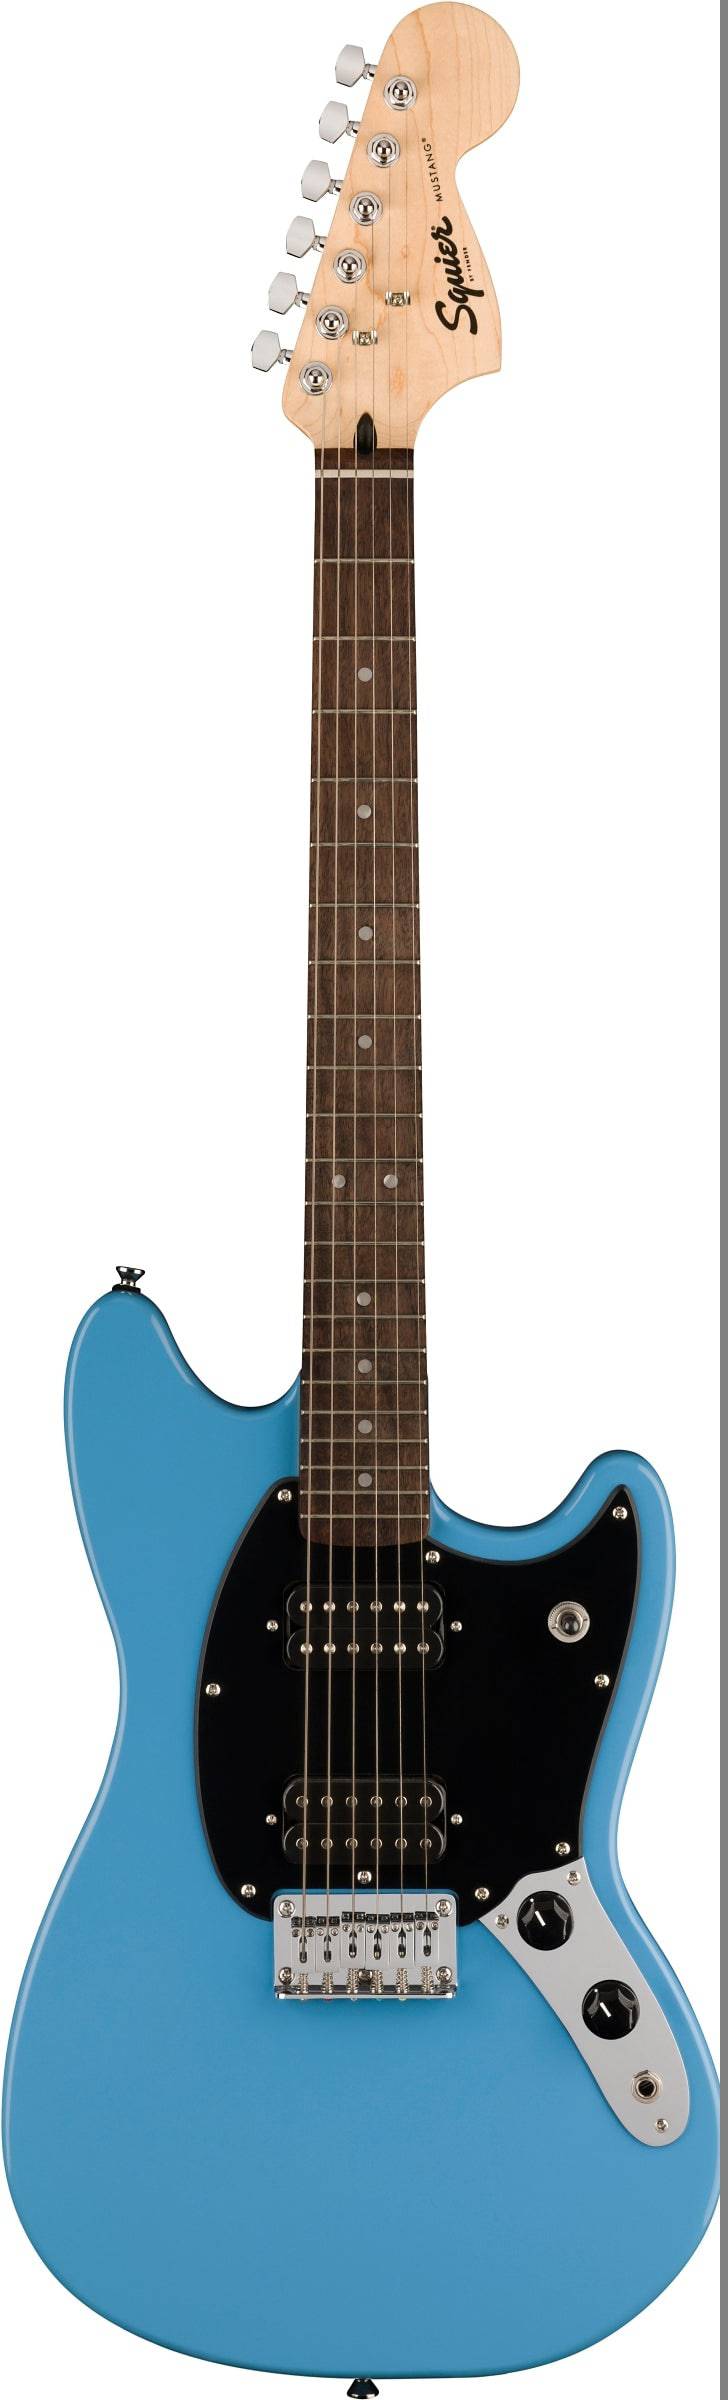 SQUIER SONIC MUSTANG HH CALIFORNIA BLUE - Joondalup Music Centre